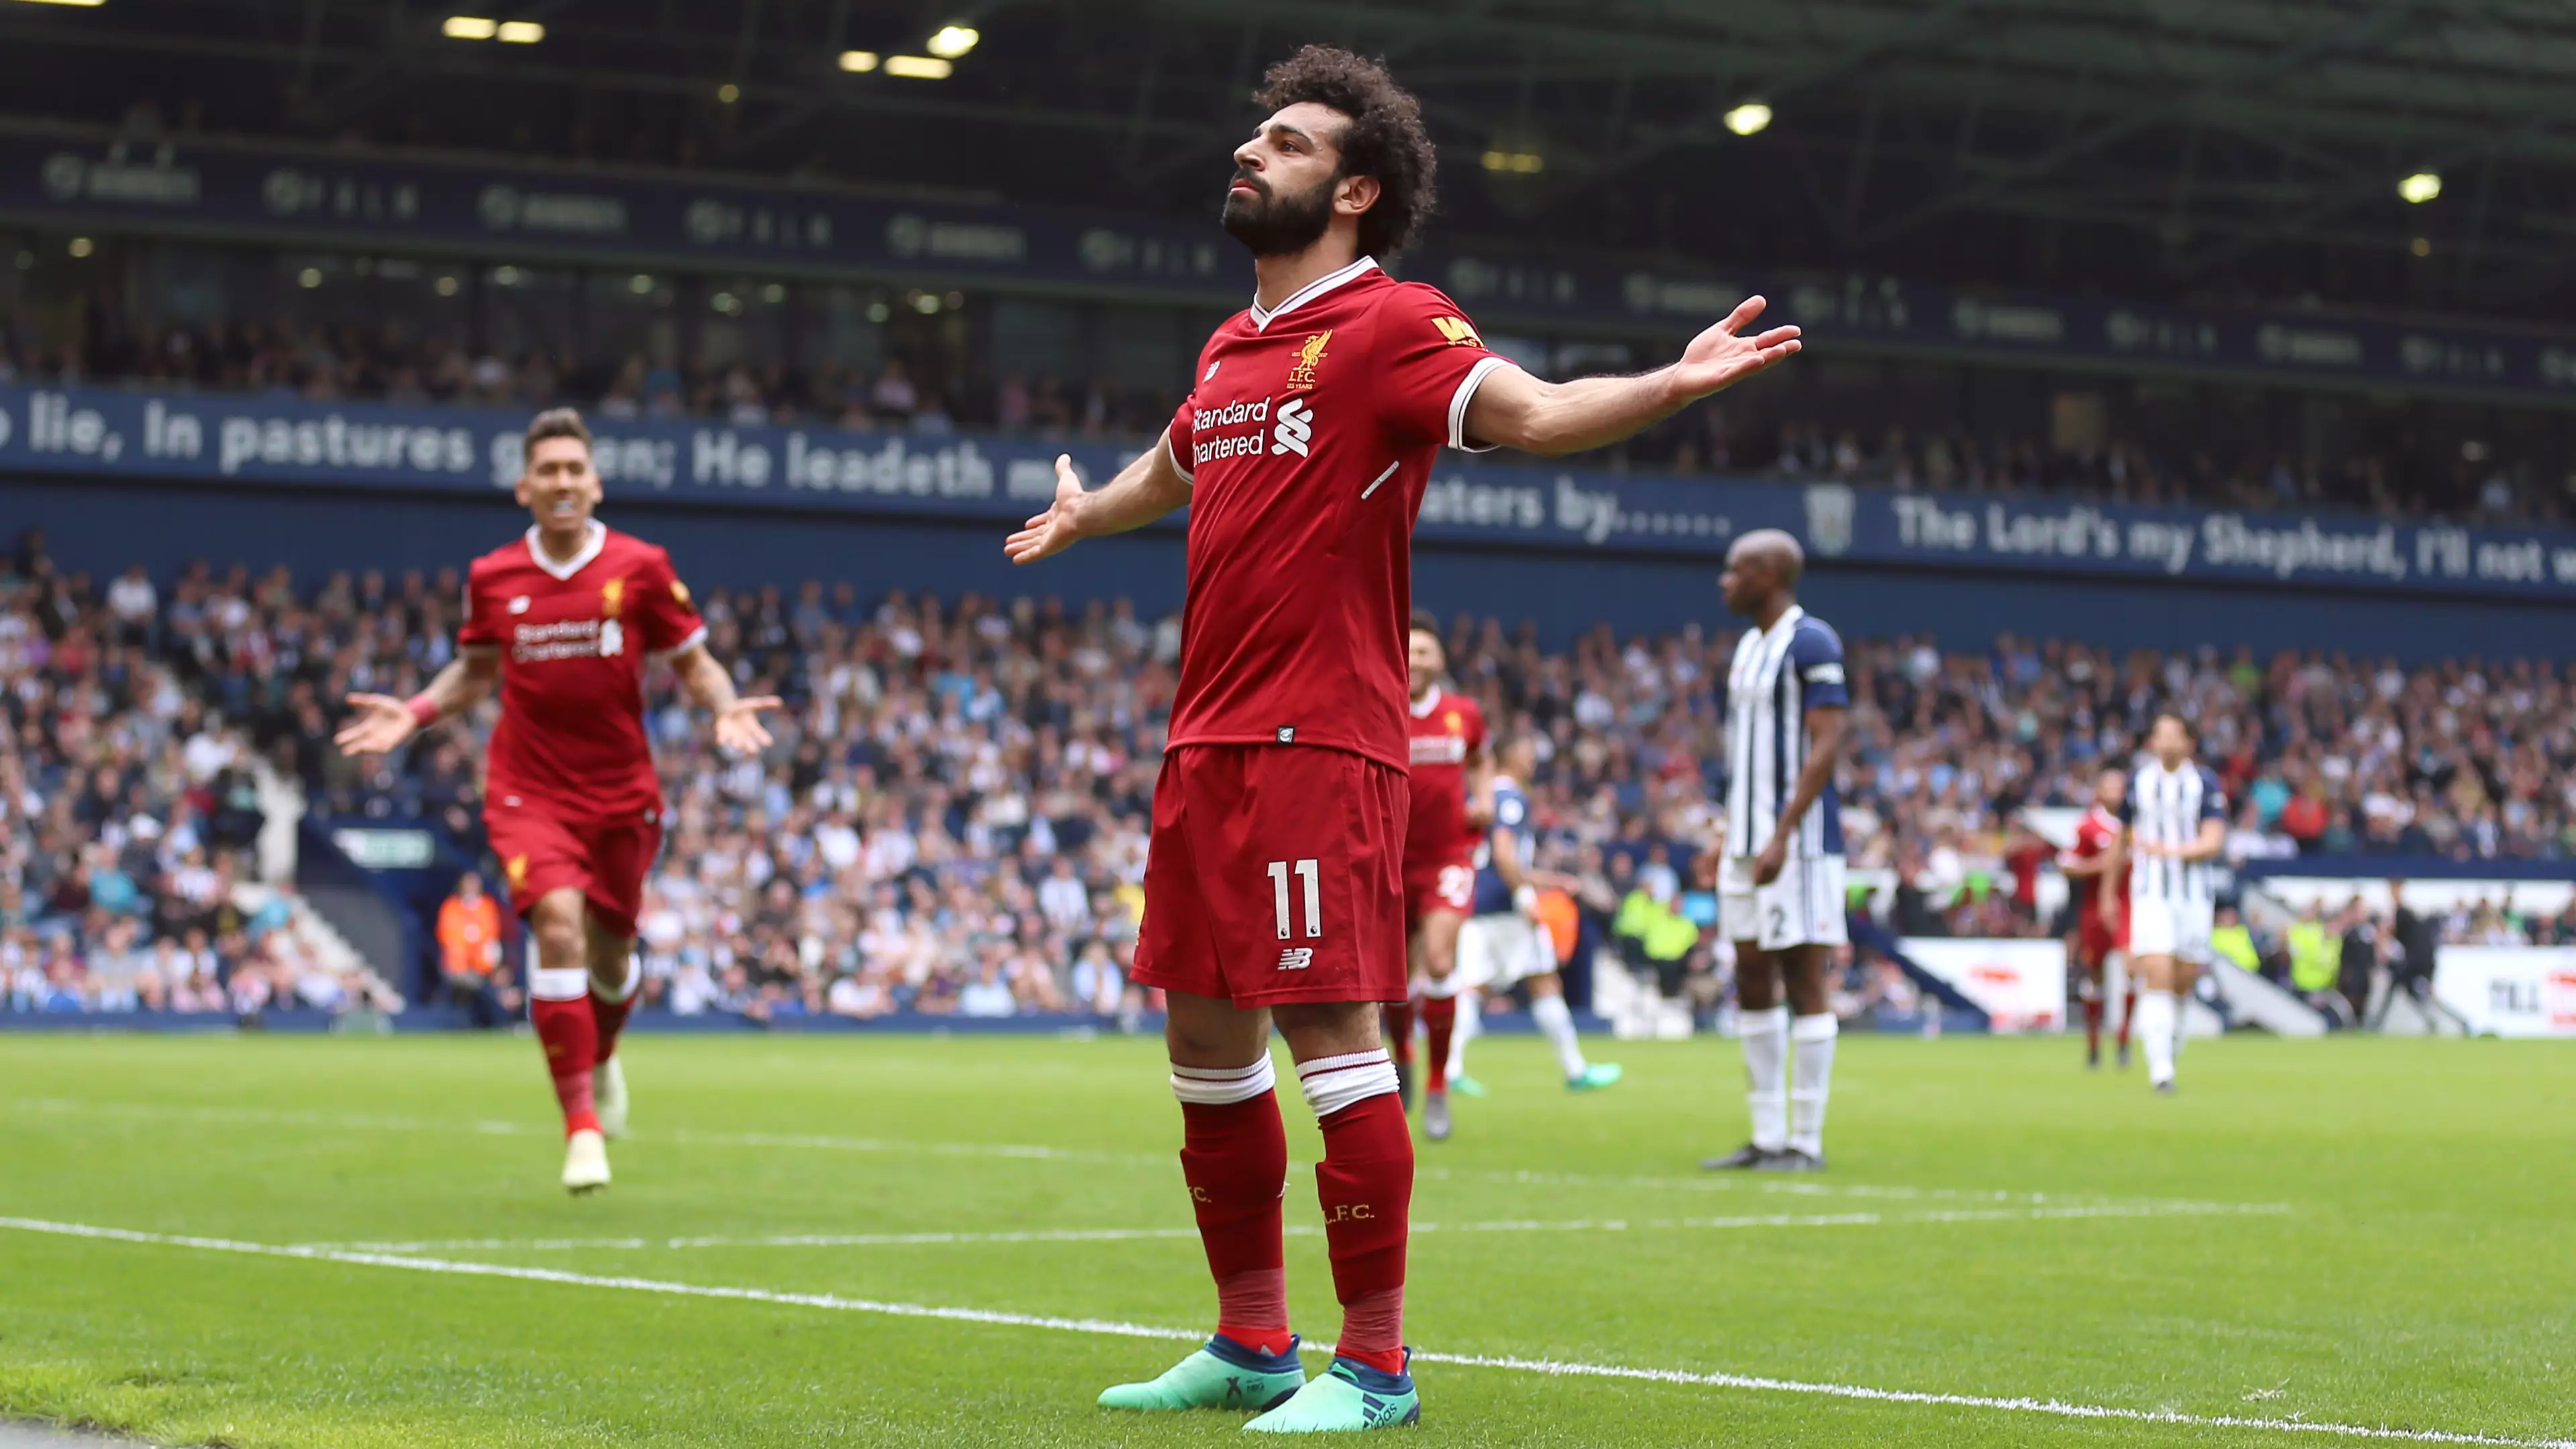 Mo Salah Equals Premier League Record Of Most Goals In A 38-Game Season